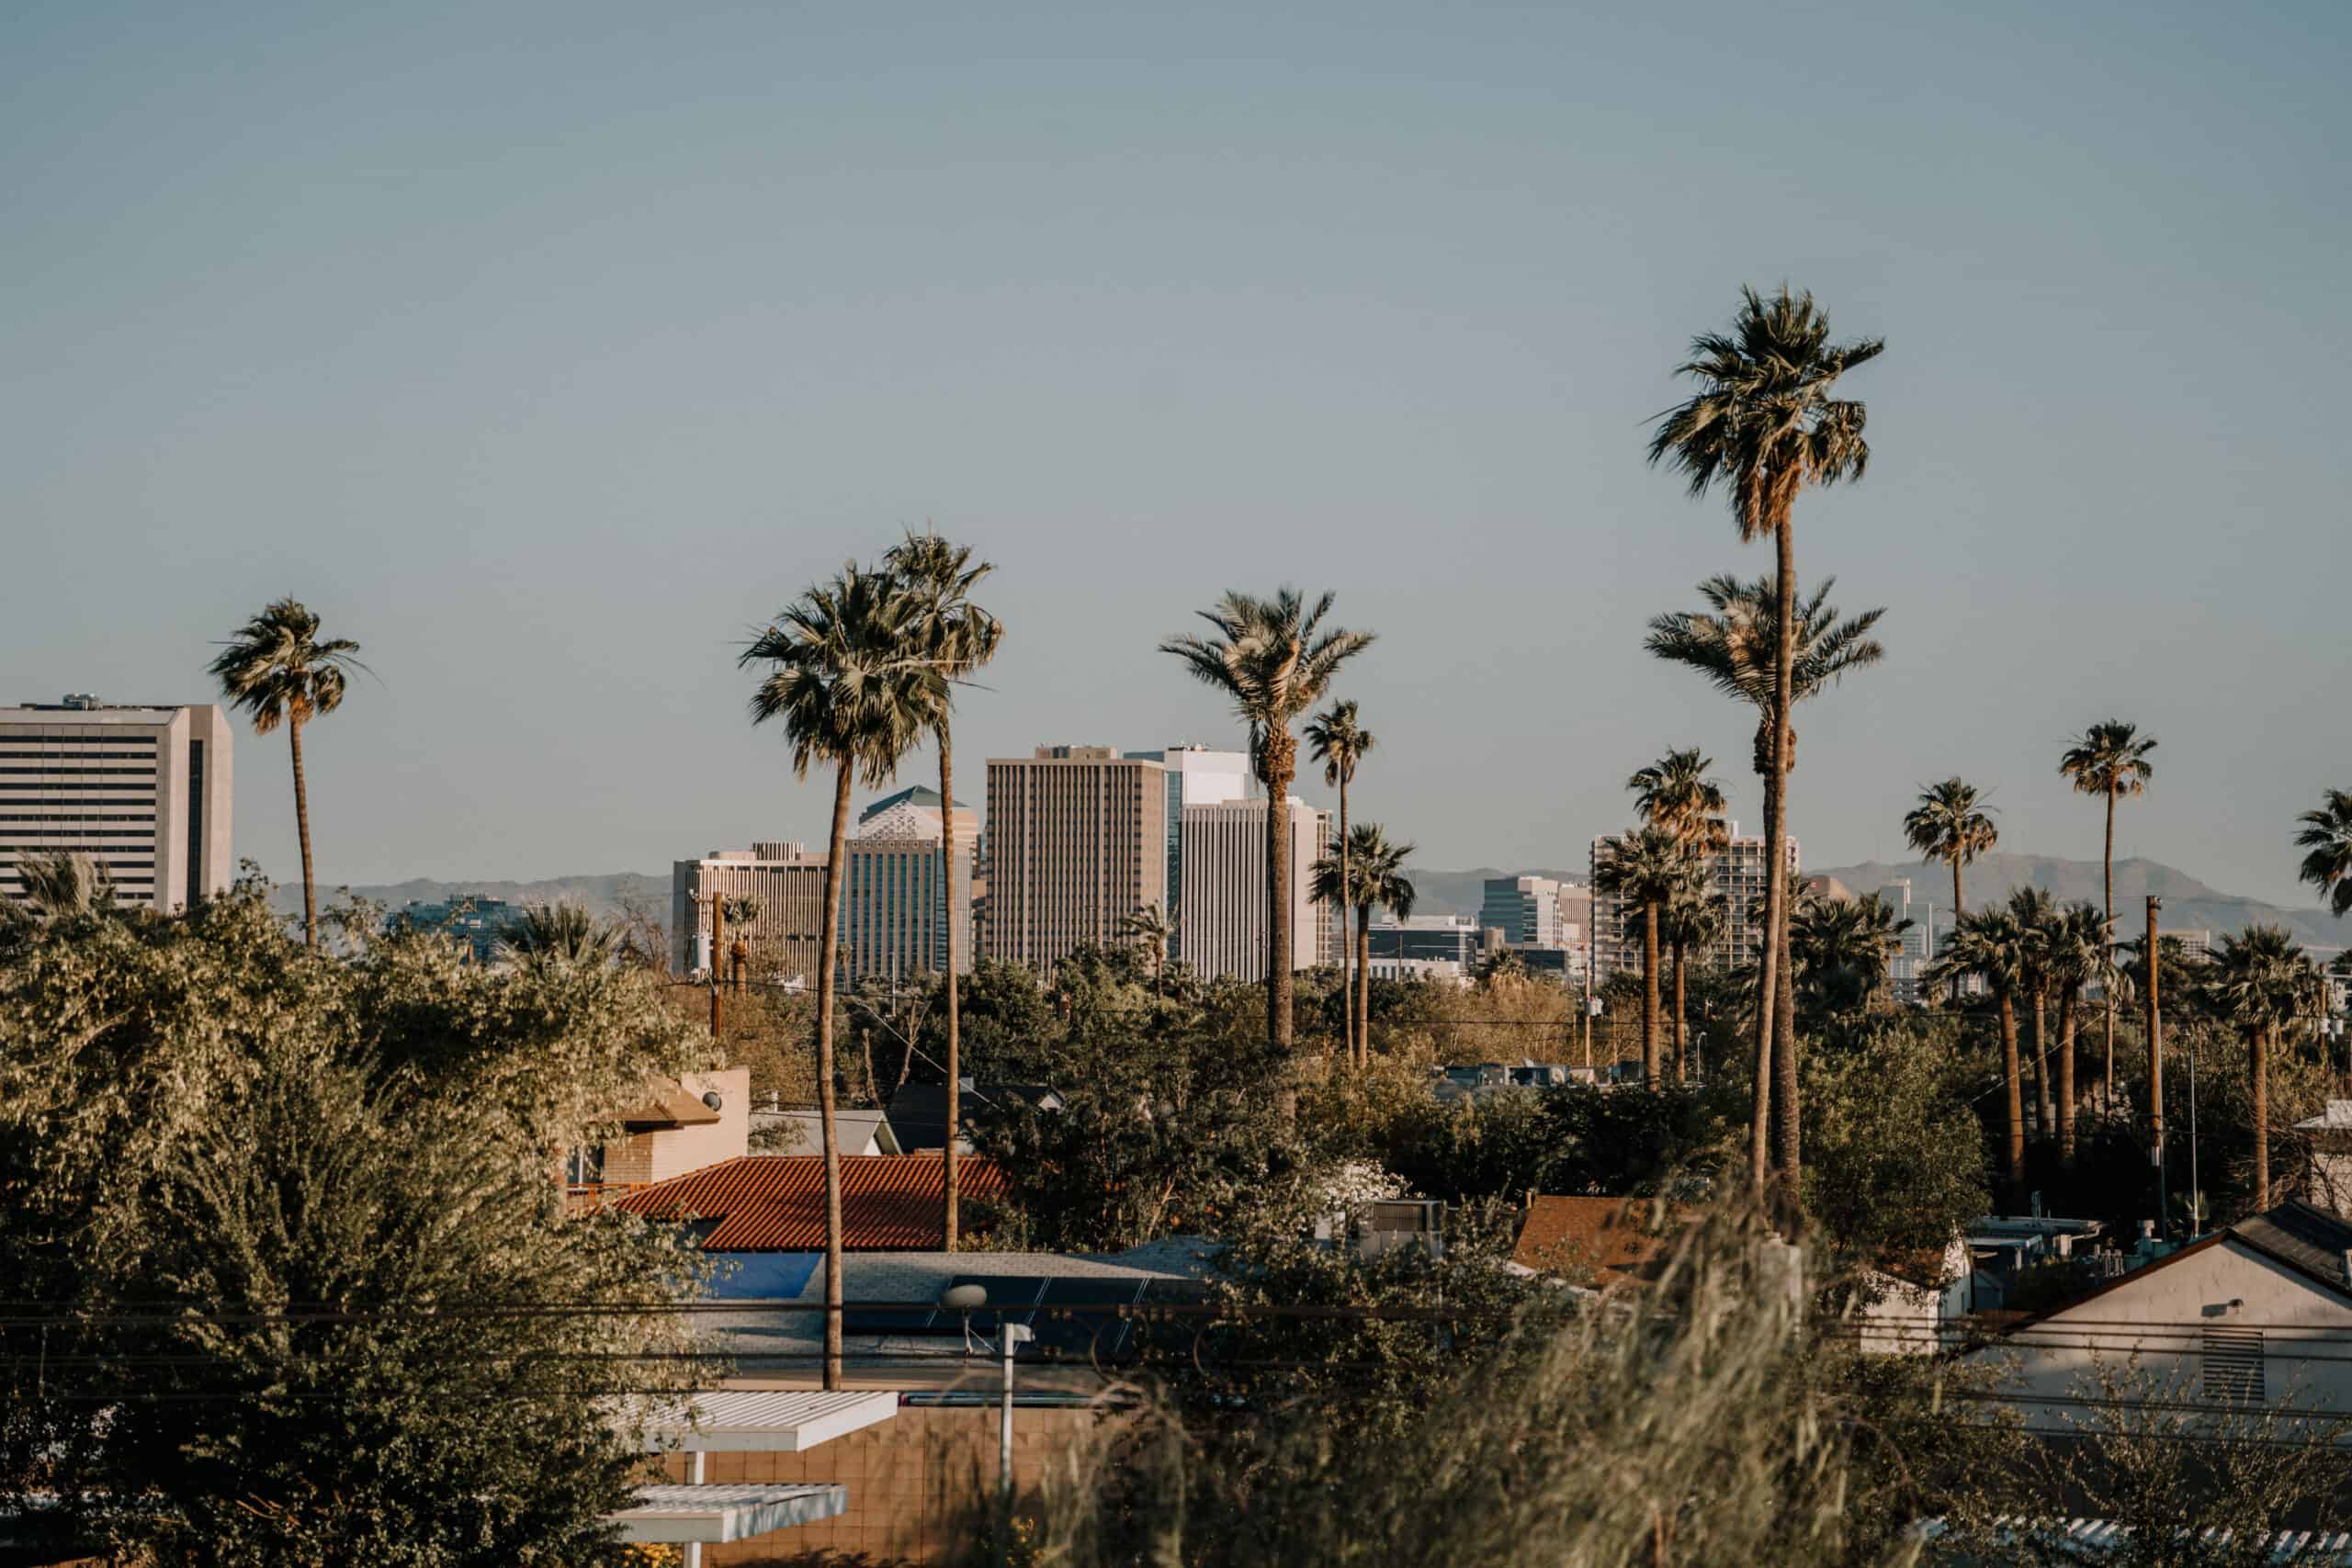 Travel Guide to Greater Phoenix, Arizona: Things to Do, Where to Eat + Stay